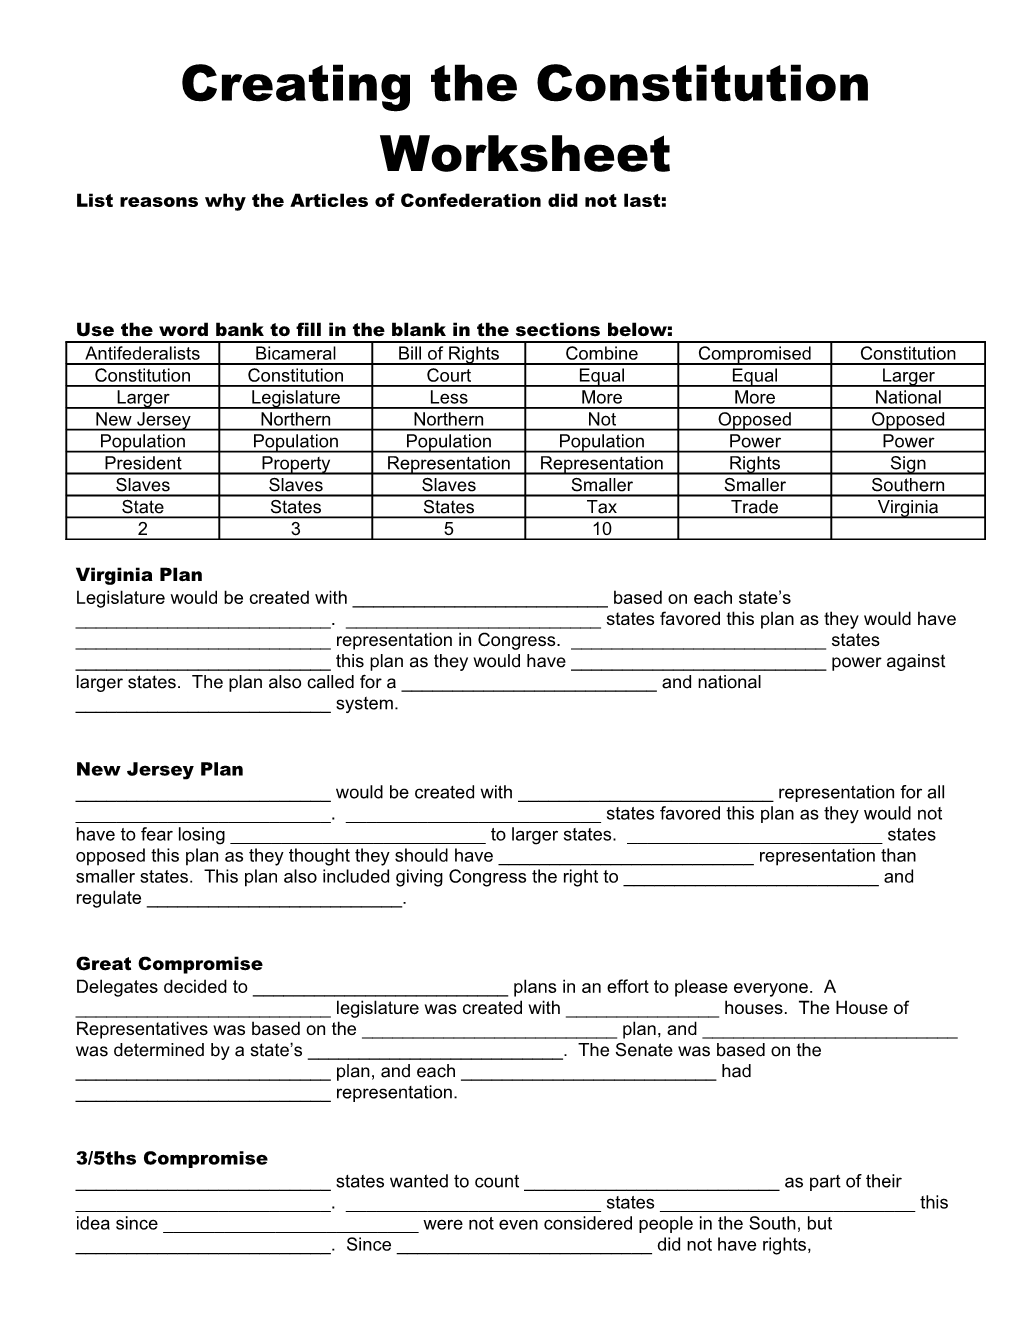 Creating the Constitution Worksheet